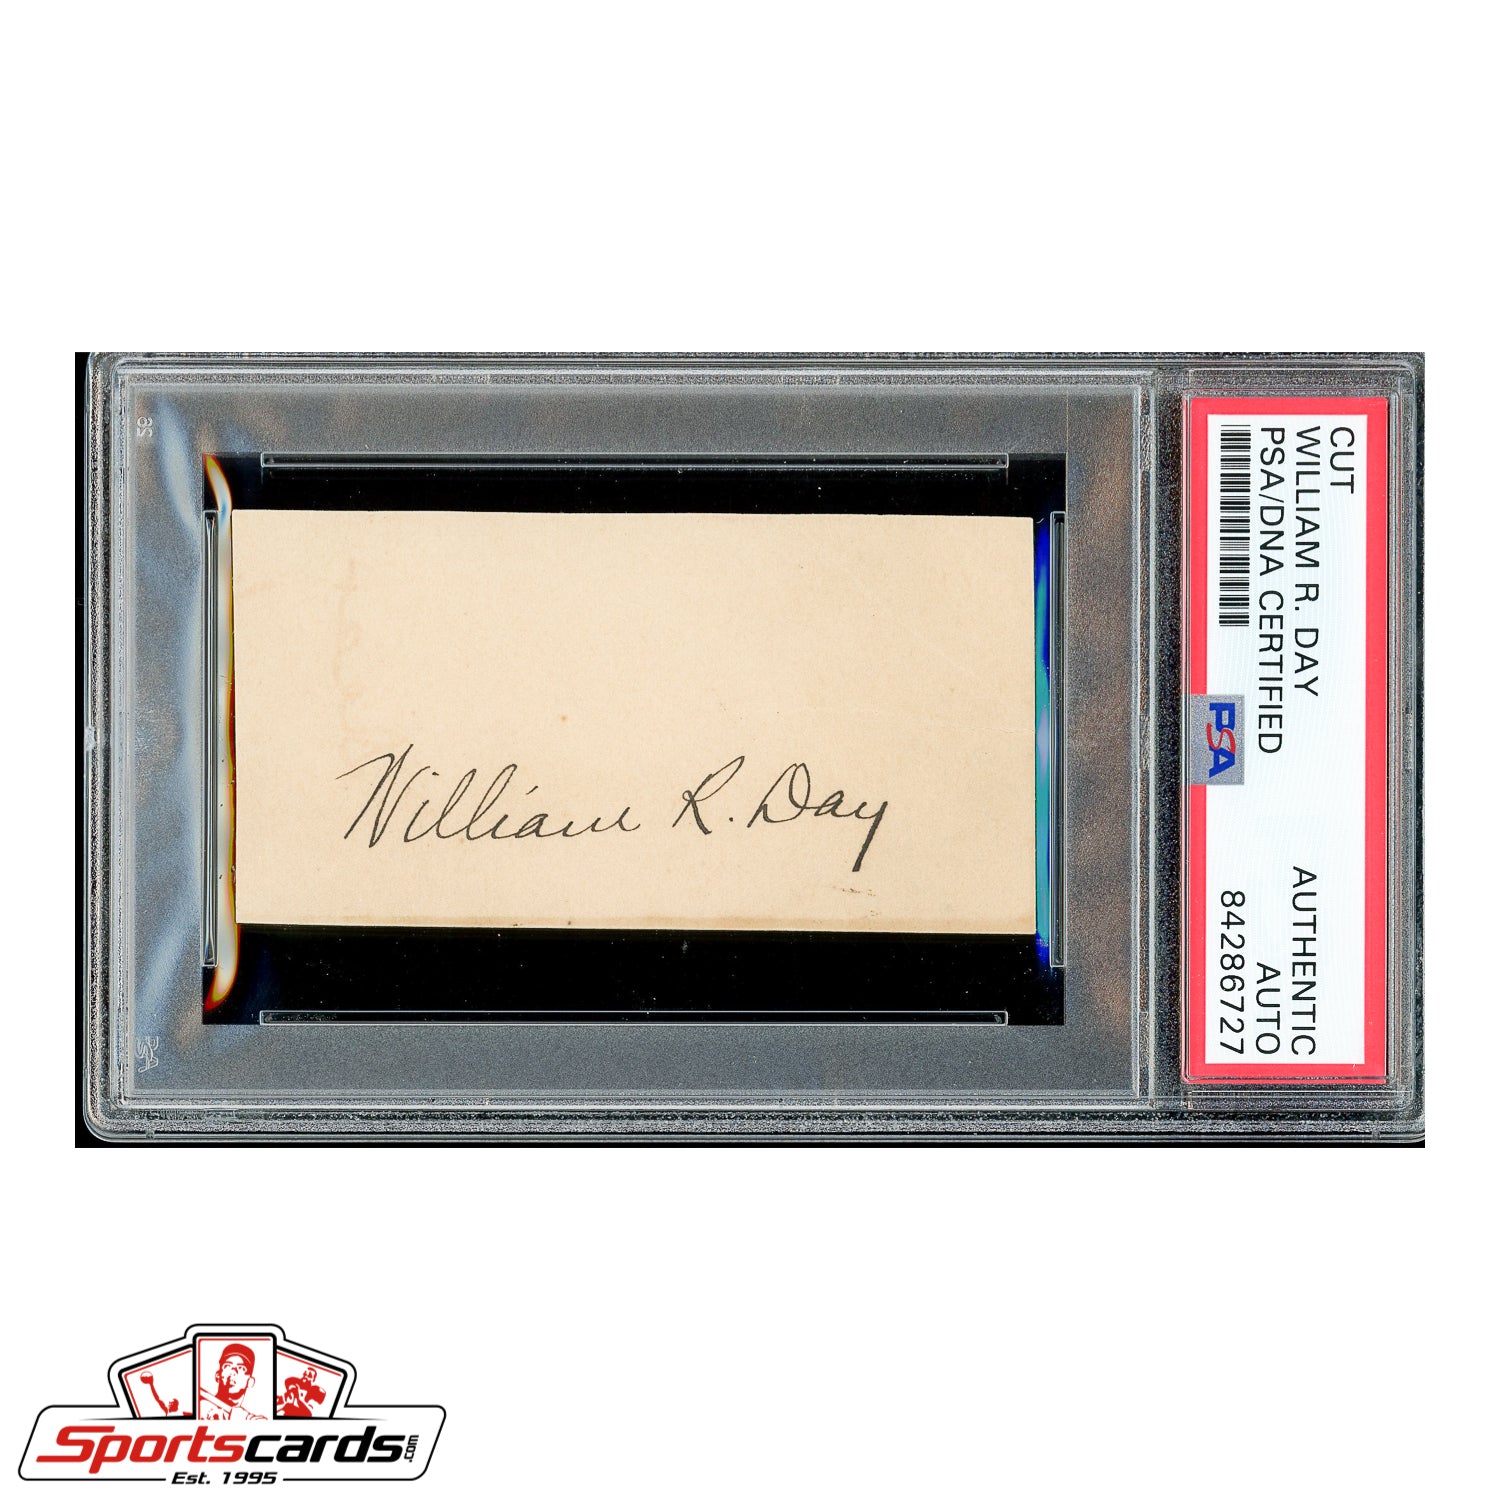 Supreme Court Justice William R. Day Signed Autographed Card - PSA/DNA